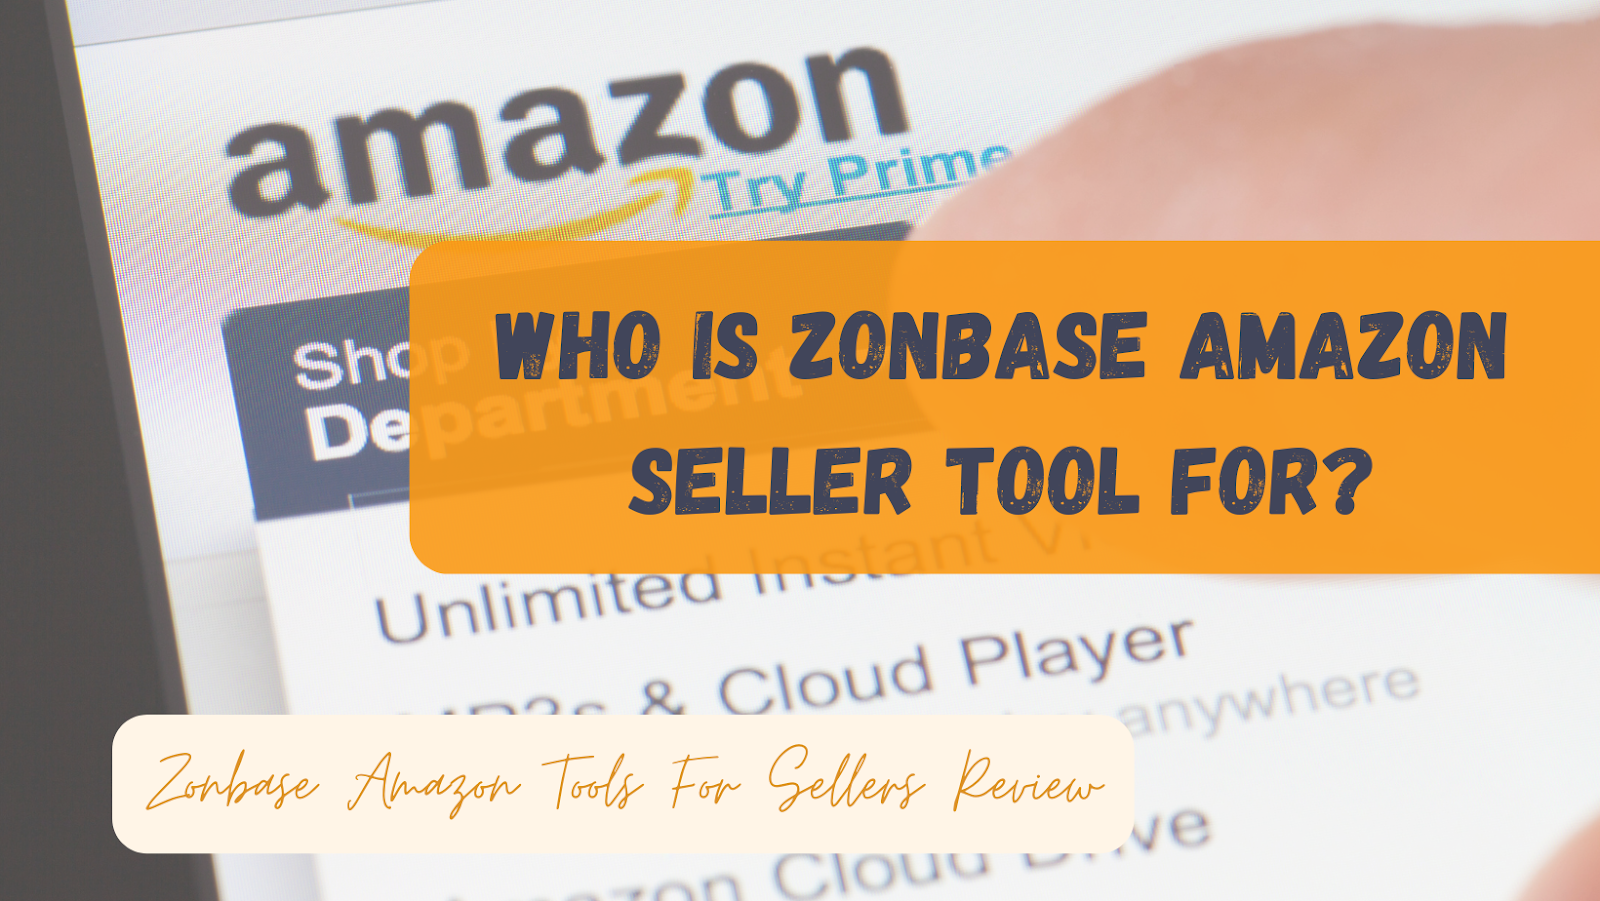 Who Is Zonbase Amazon Seller Tool For?